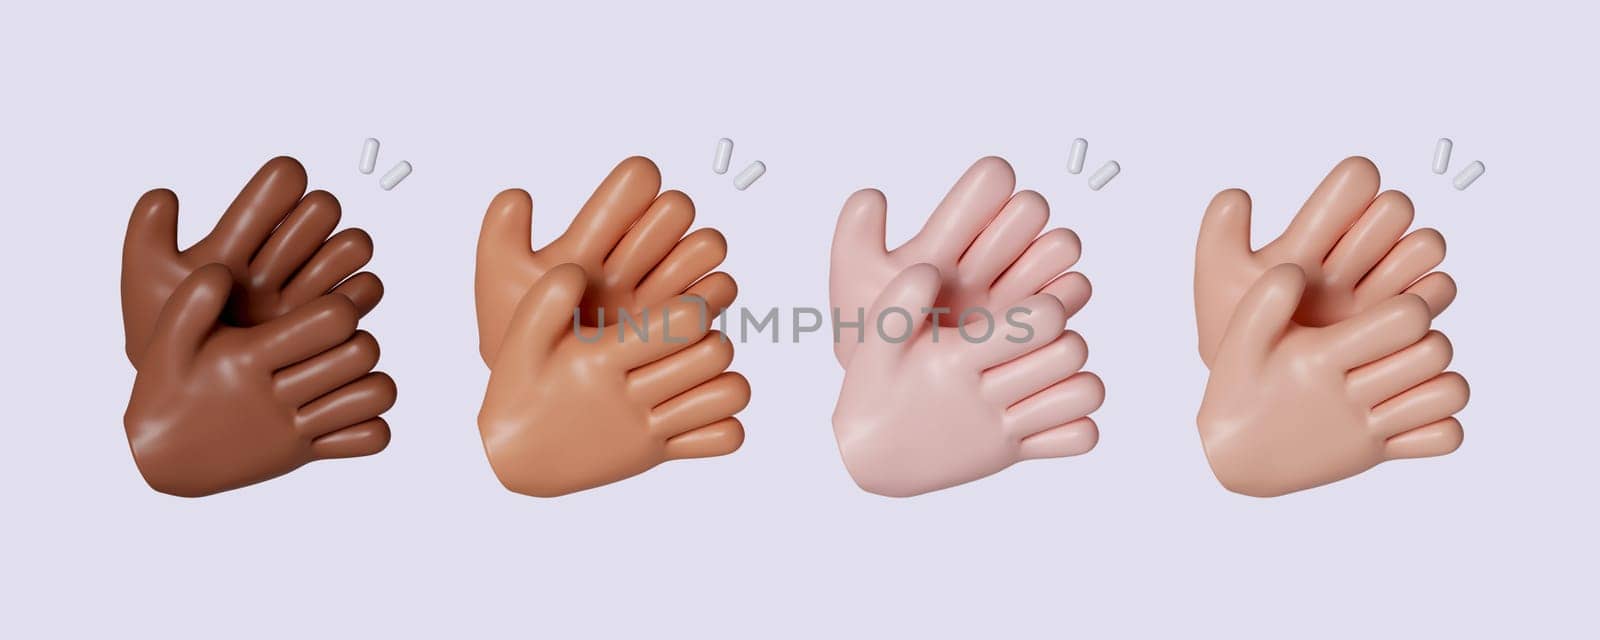 3d Cartoon human hand applause. icon isolated on gray background. 3d rendering illustration. Clipping path. by meepiangraphic